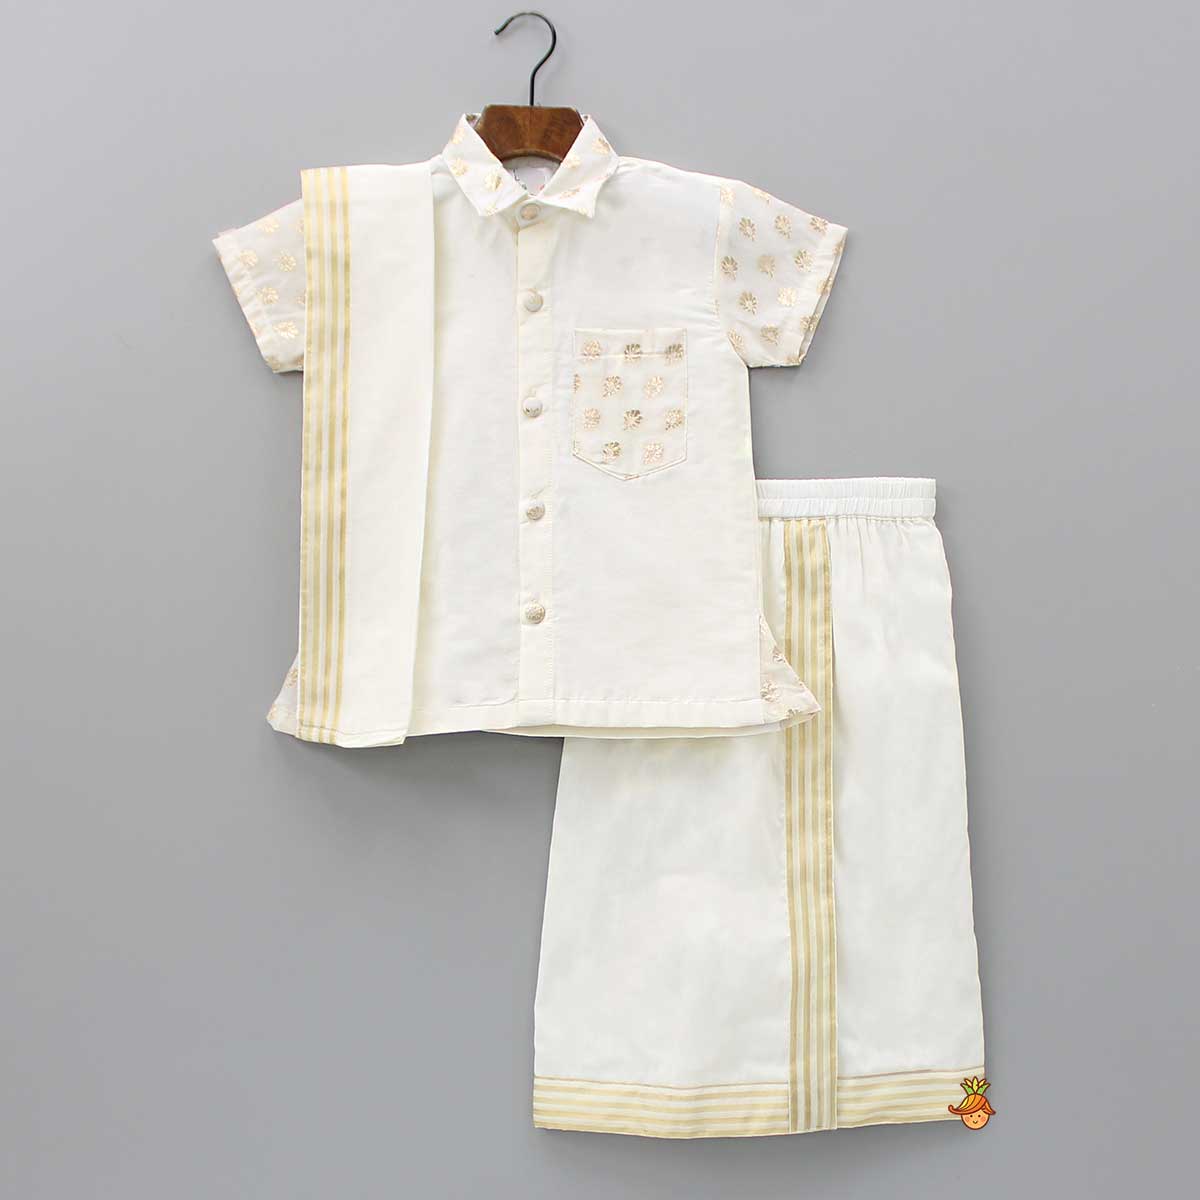 Exquisite Off White Shirt And Stitched Lungi With Shawl